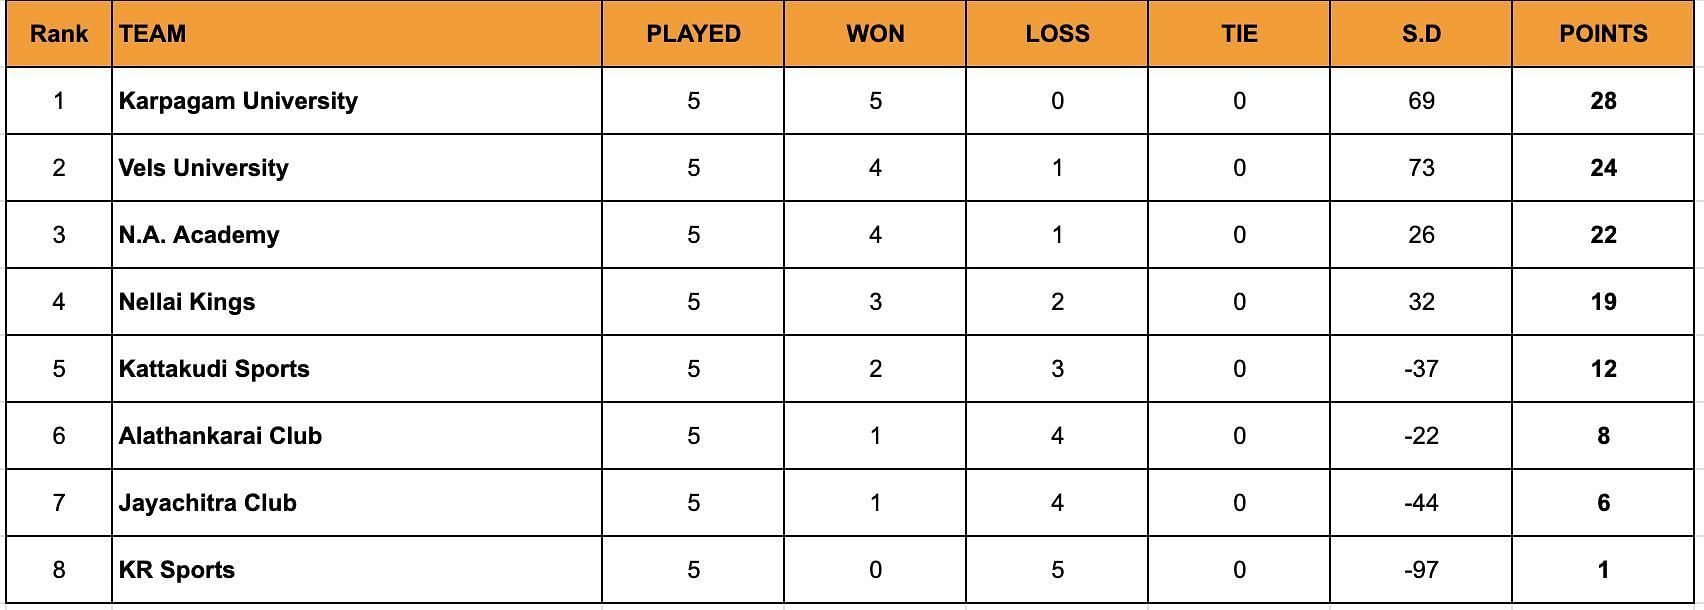 A look at the standings after the end of Day 5.